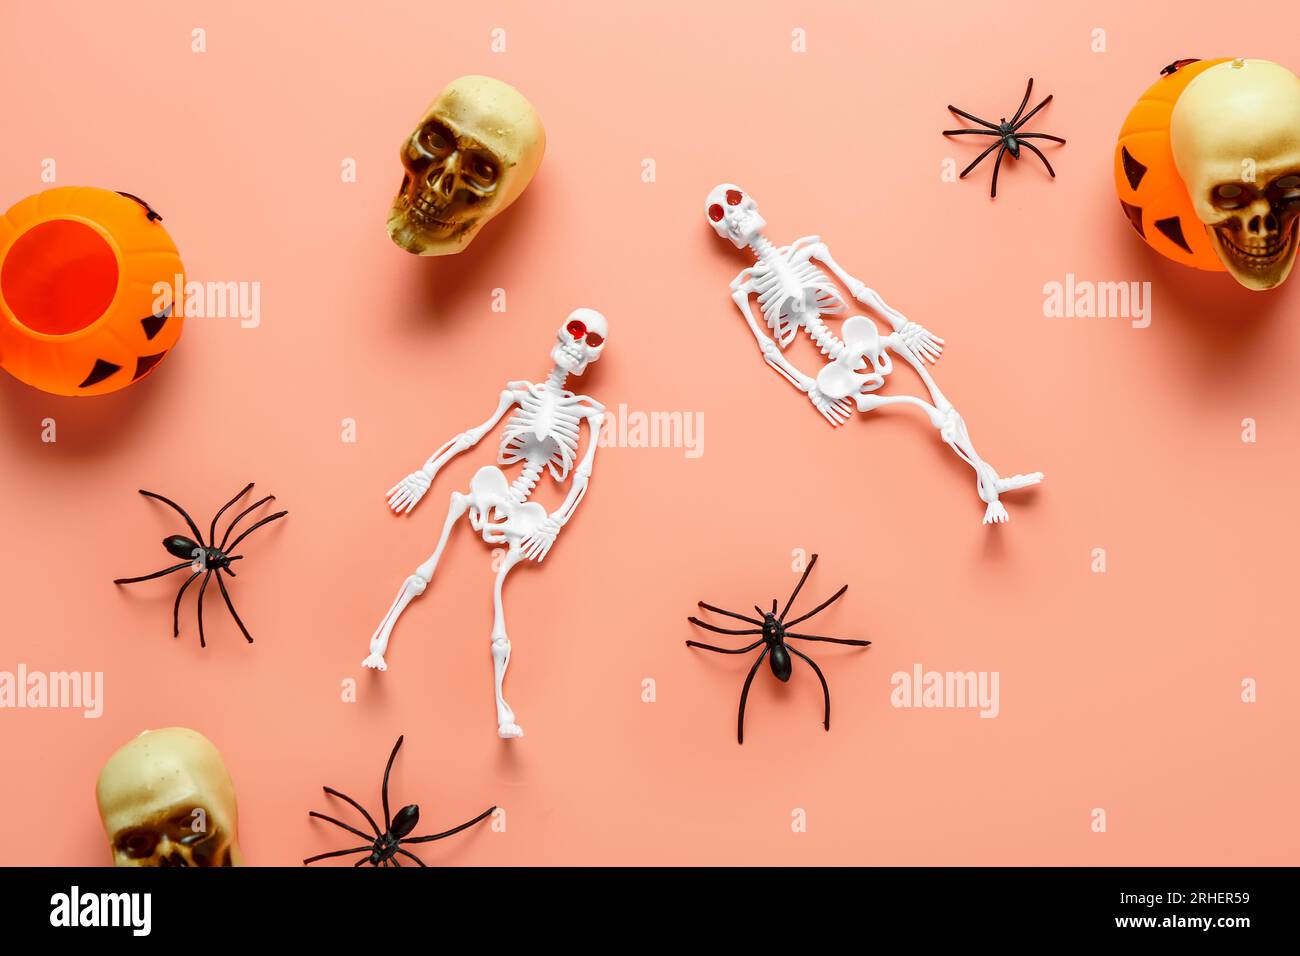 Composition with skeletons, skulls, pumpkins and spiders for Halloween celebration on coral background Stock Photo